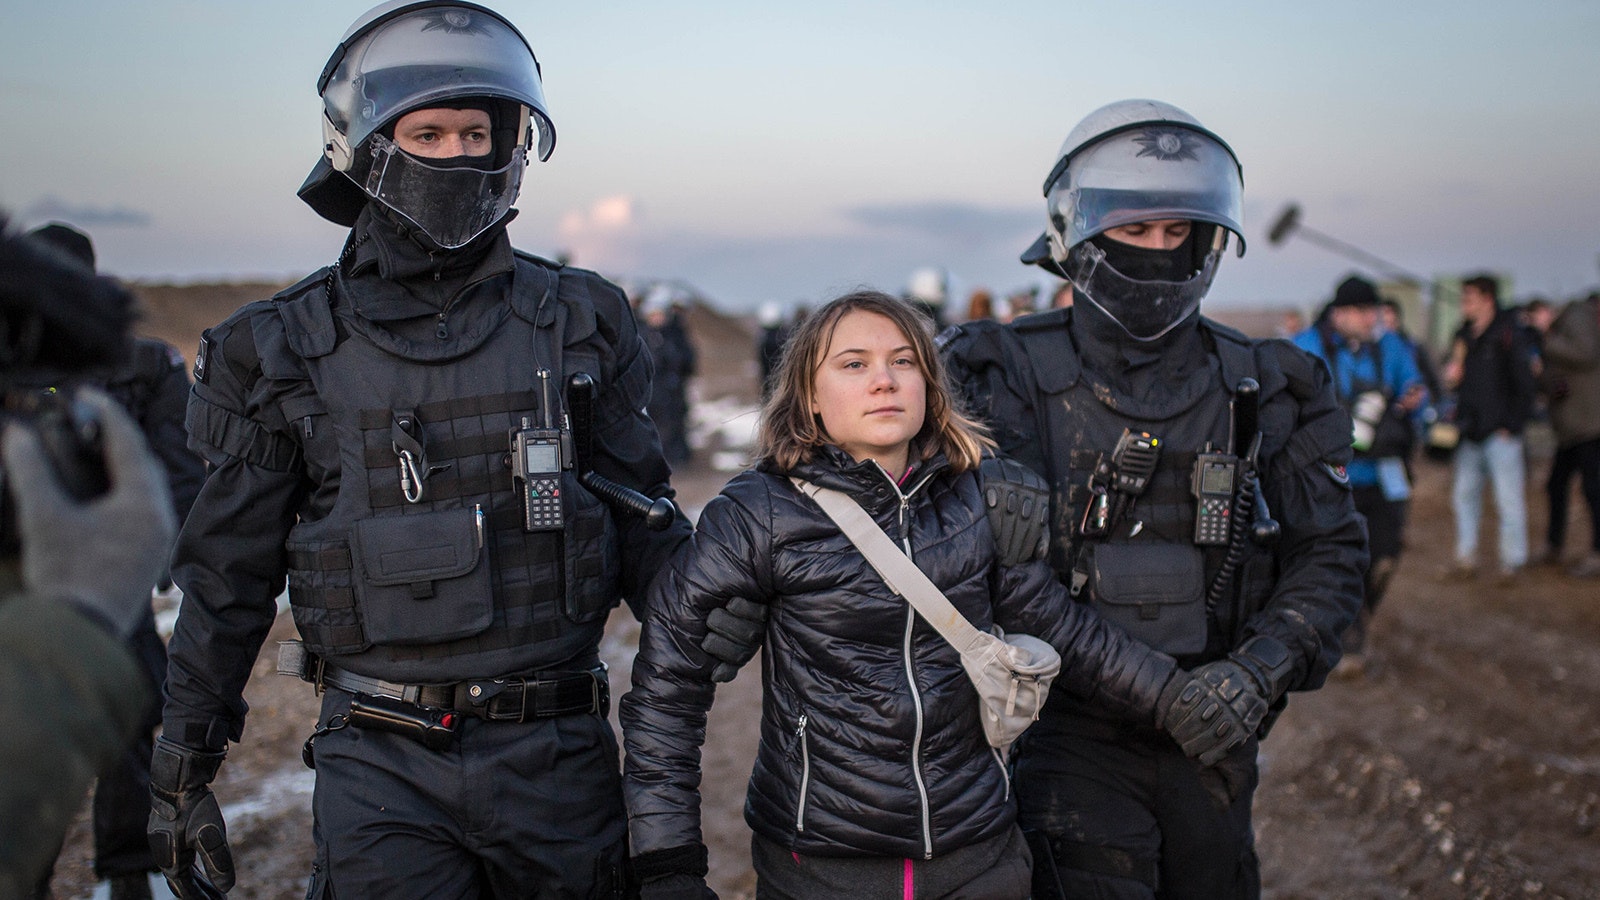 Swedish climate activist Greta Thunberg is arrested at a climate protest.